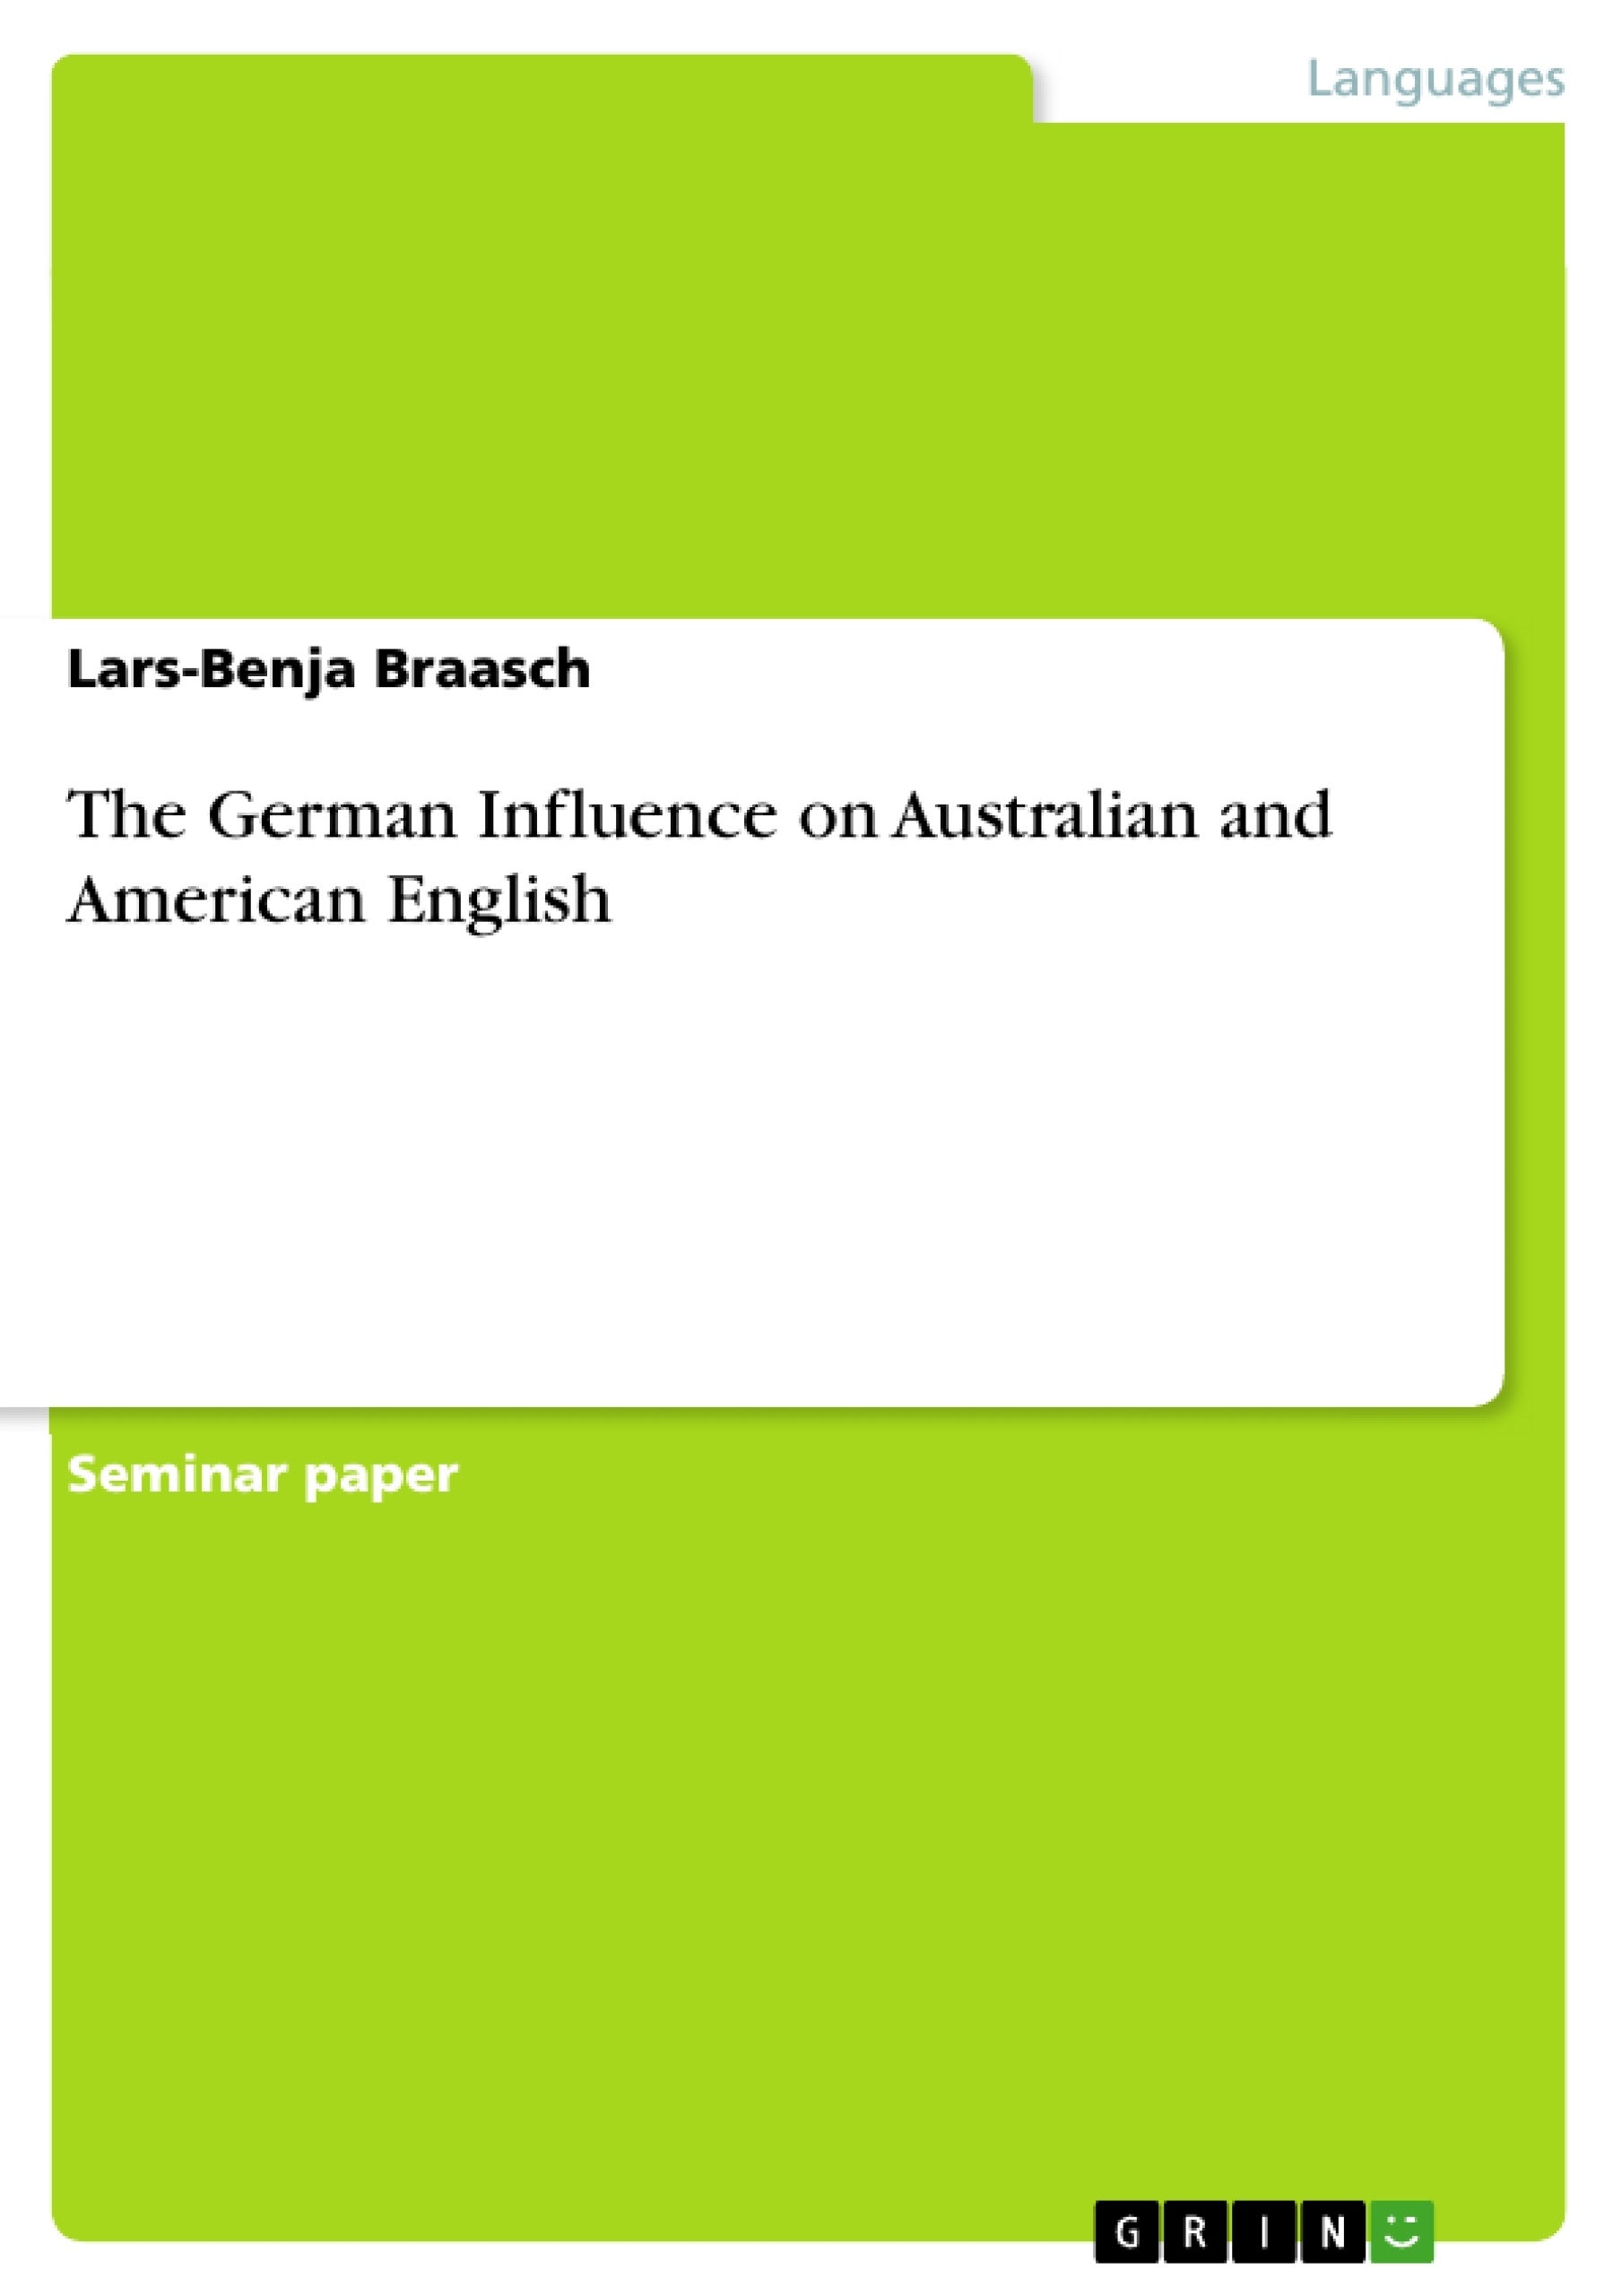 Title: The German Influence on Australian and American English